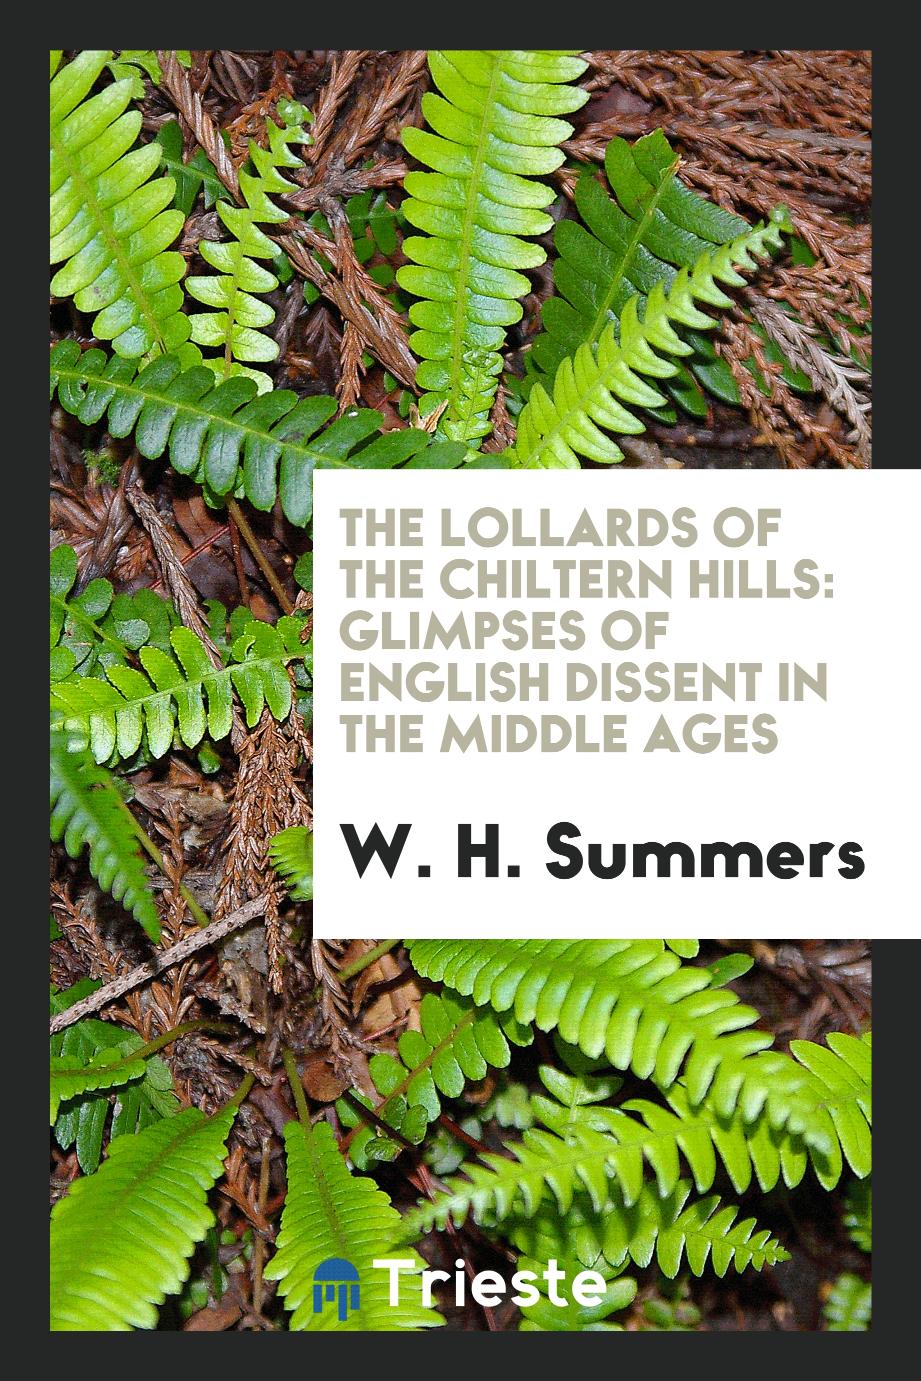 The Lollards of the Chiltern hills: glimpses of English dissent in the middle ages